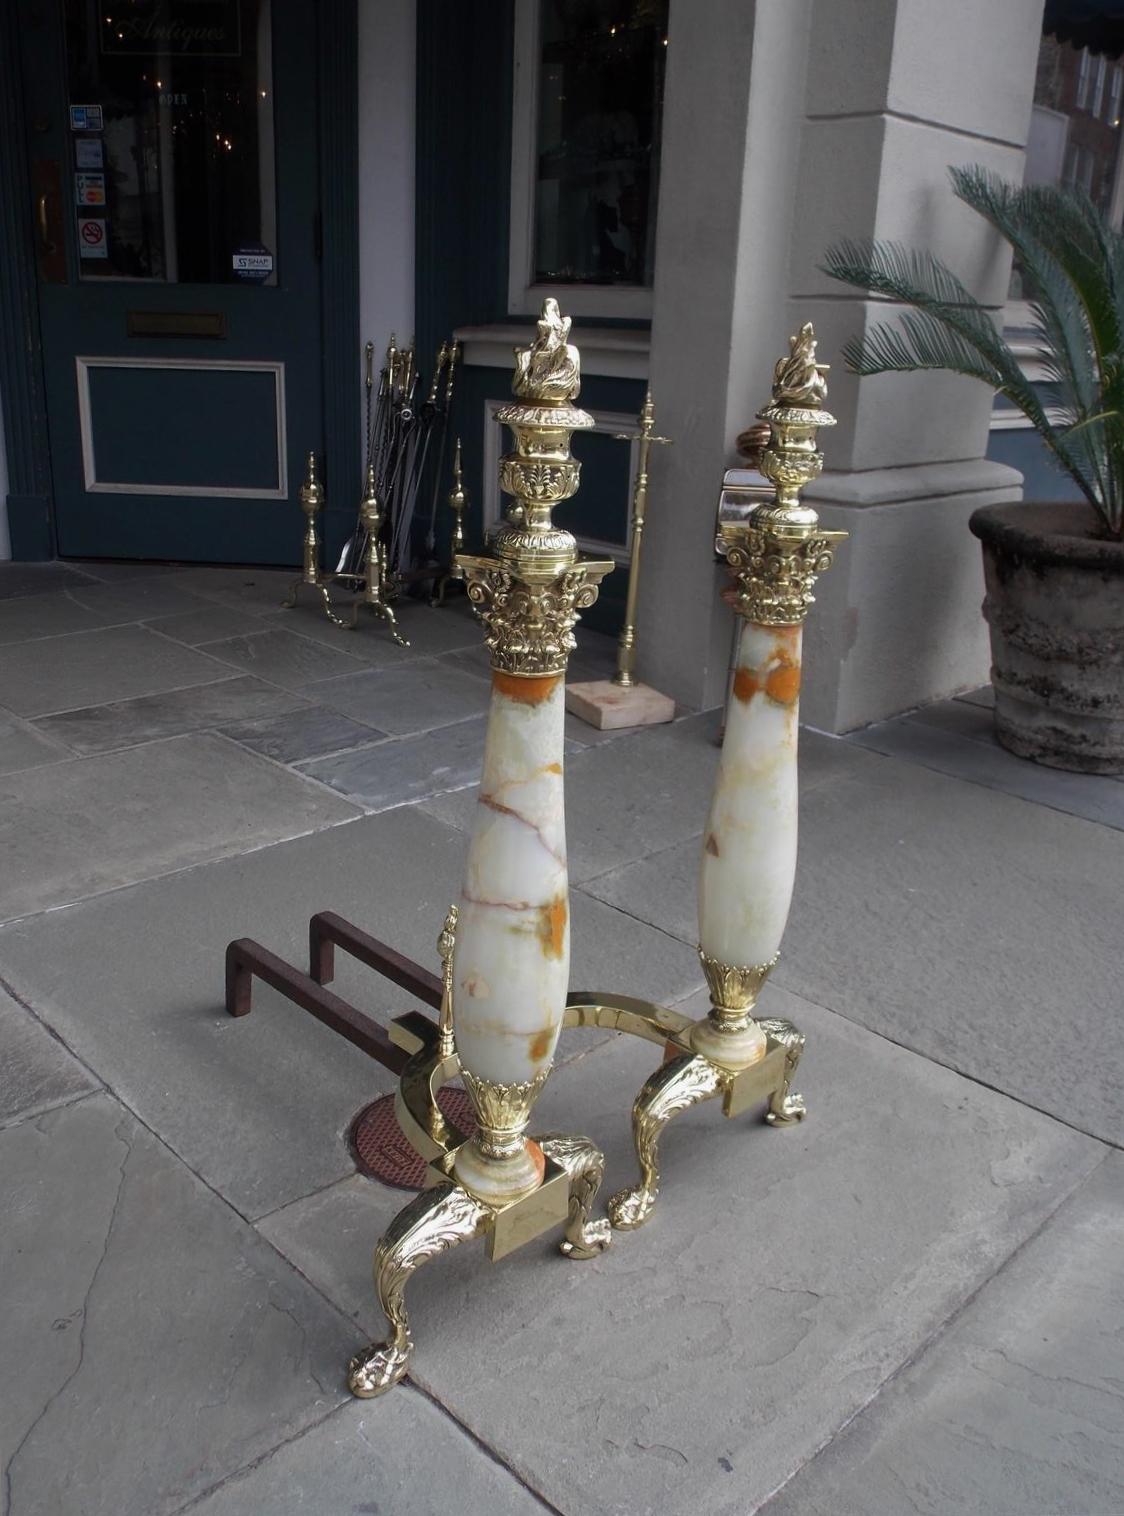 Pair of American brass and onyx andirons with flanking flame finial Urns, Corinthian capitals, centered bulbous onyx columns, squared floral plinths, matching flame finial log stops, and resting on acanthus scrolled ball and claw feet, Mid-19th